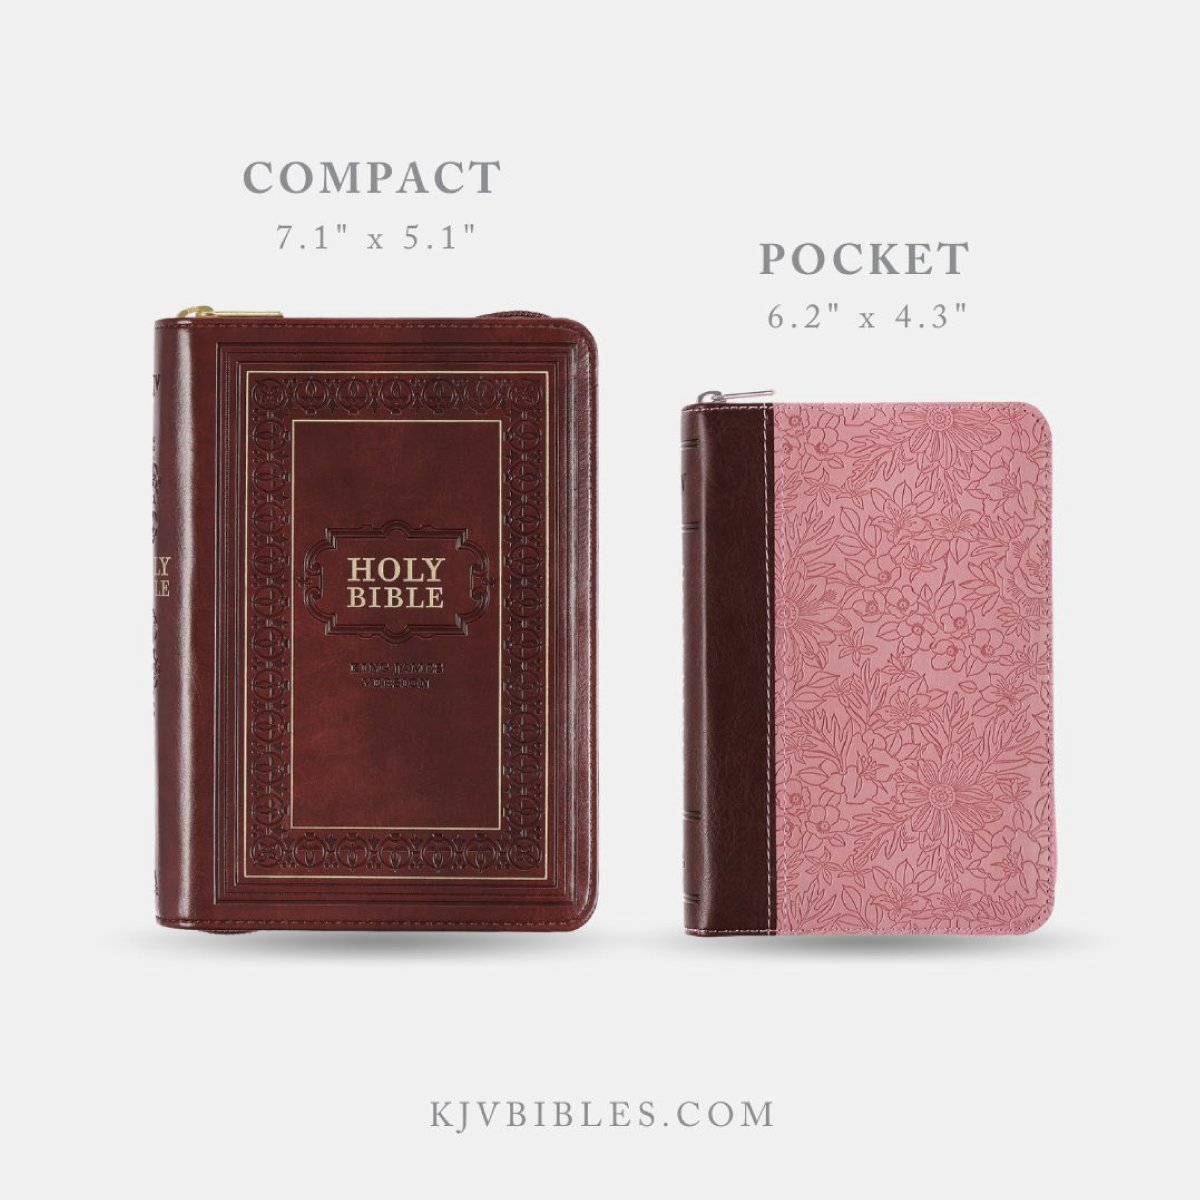 Looking for a grad gift? Our small KJV Bible make great gifts to go along on their next adventure!
kjvbibles.com/compact-bibles
#kjvbibles #compactbibles #graduationgiftideas